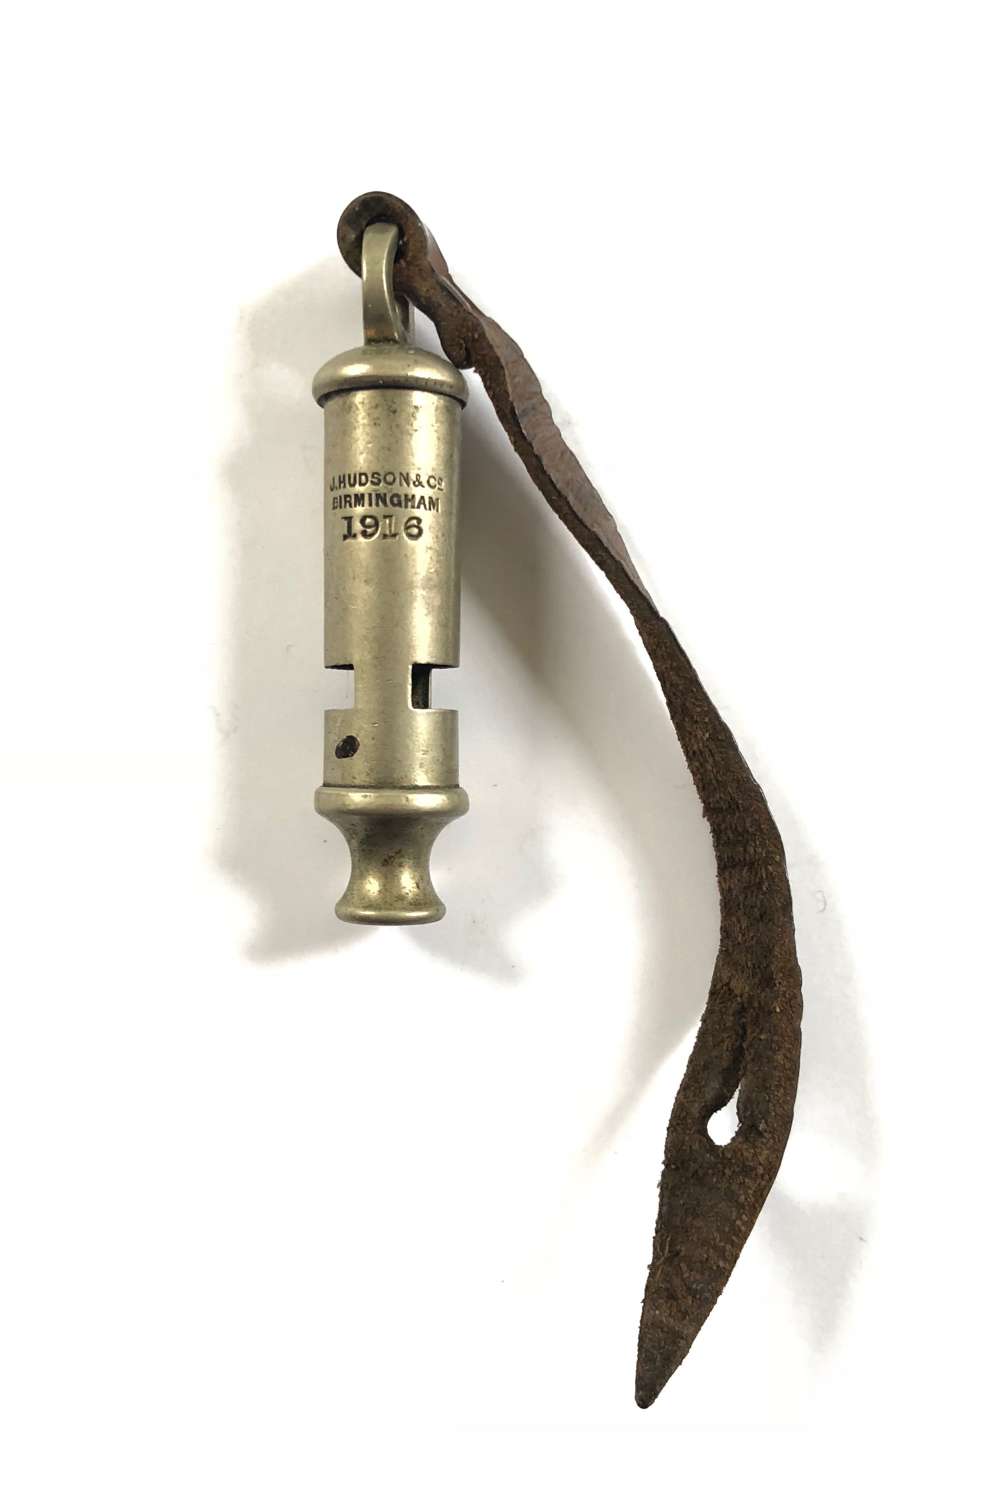 WW1 1916 Battle of the Somme Period Officer’s Trench Whistle By Hudson